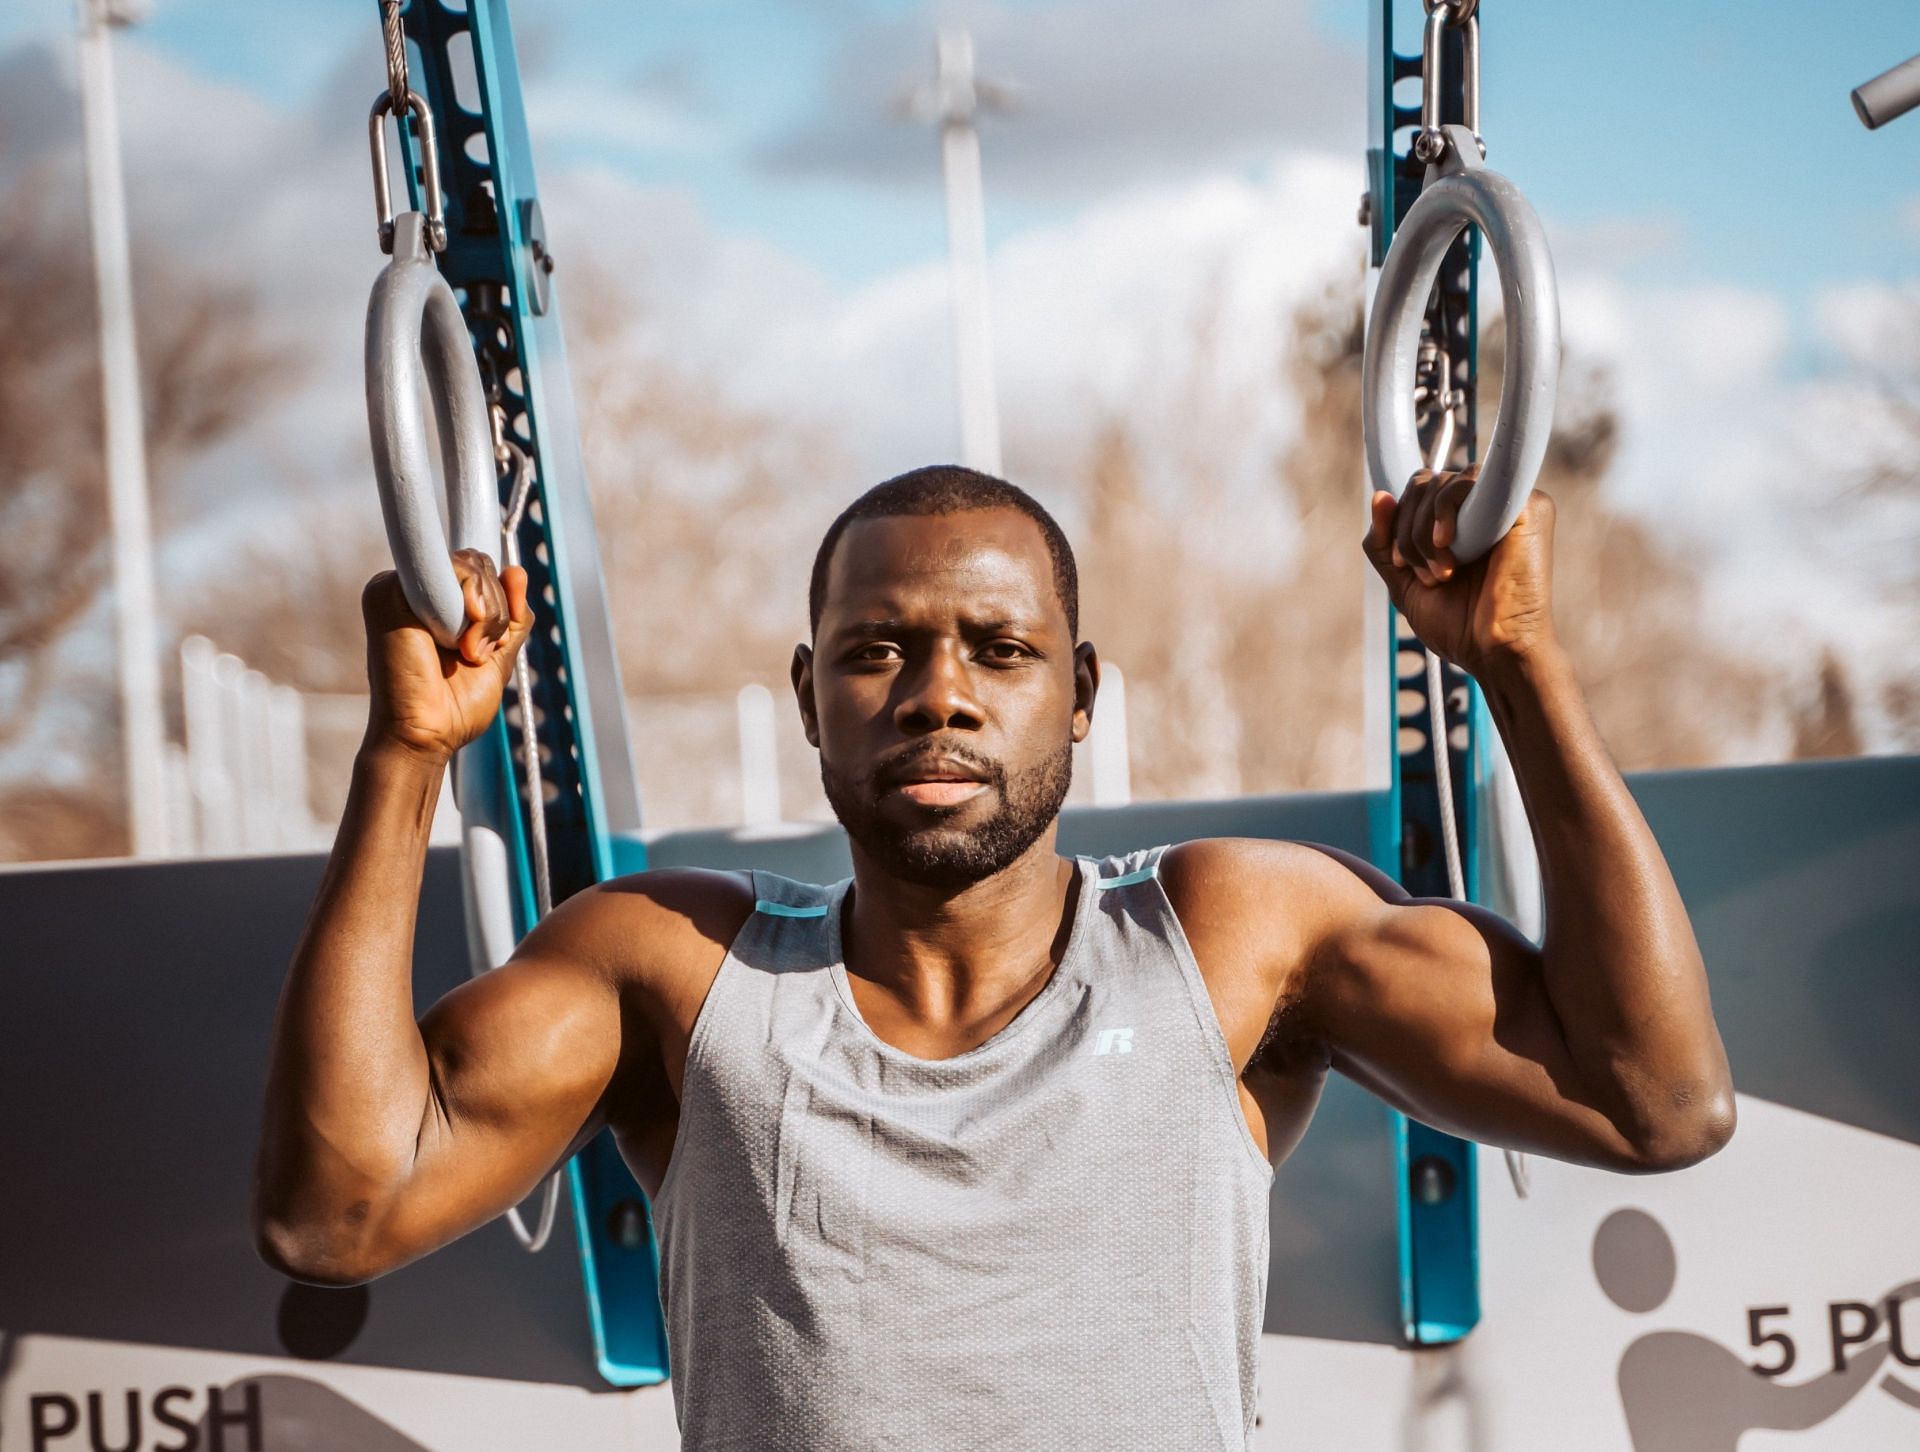 There are different techniques to do a pull-up. (Photo by Fortune Vieyra on Unsplash)